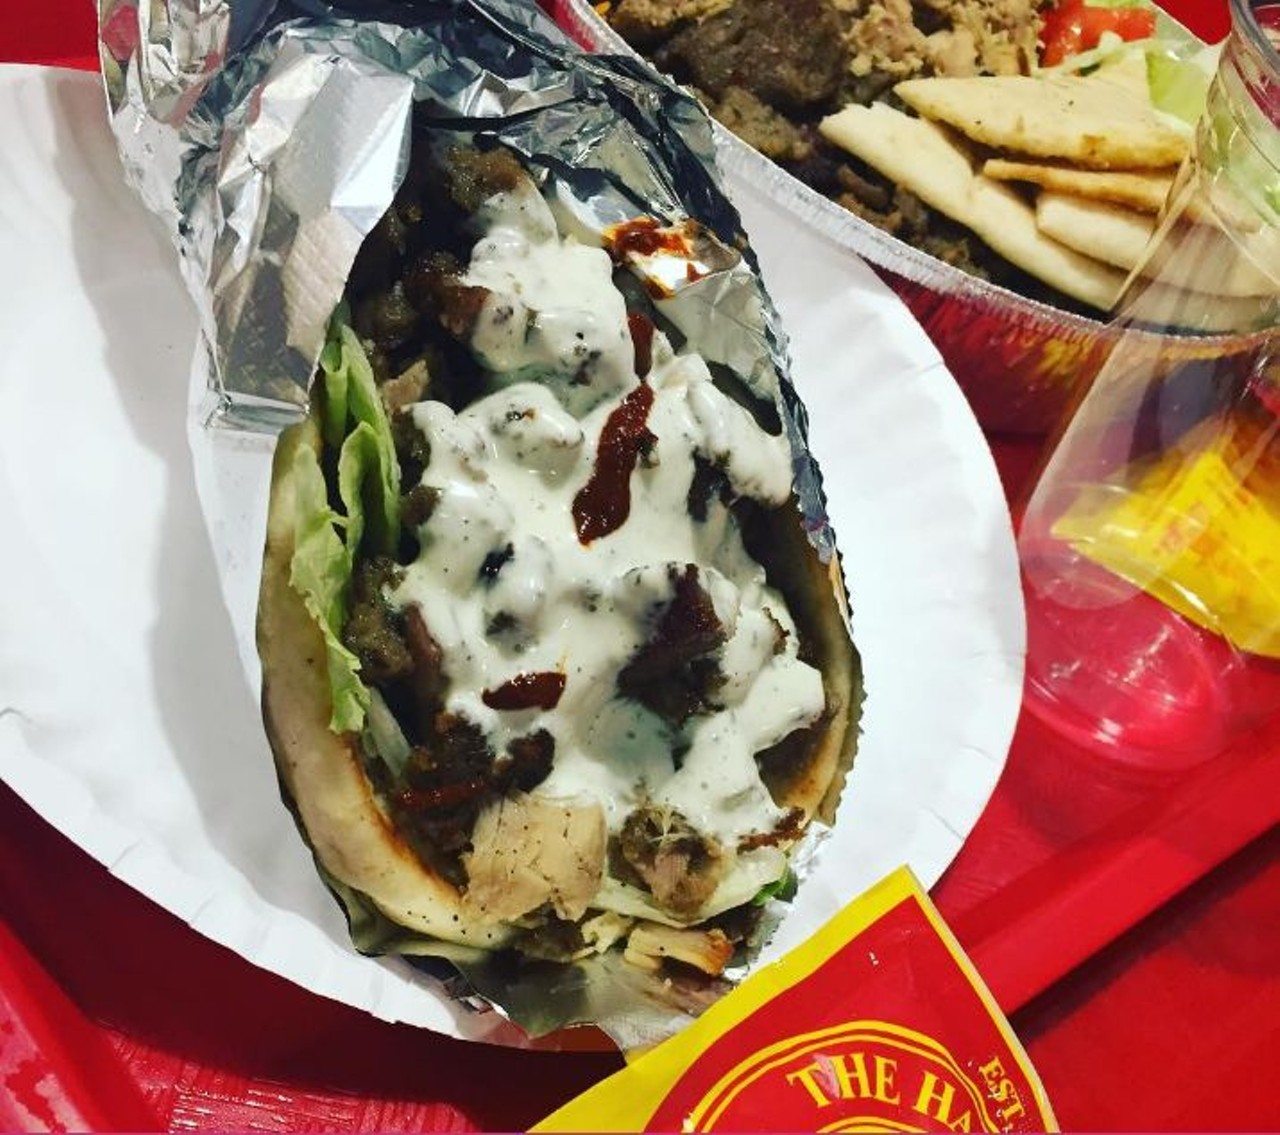 Must  try: You can&#146;t go wrong with the classic beef gyro sandwich, topped with their famous white and hot sauce.
Photo via thekoreandragon/Instagram